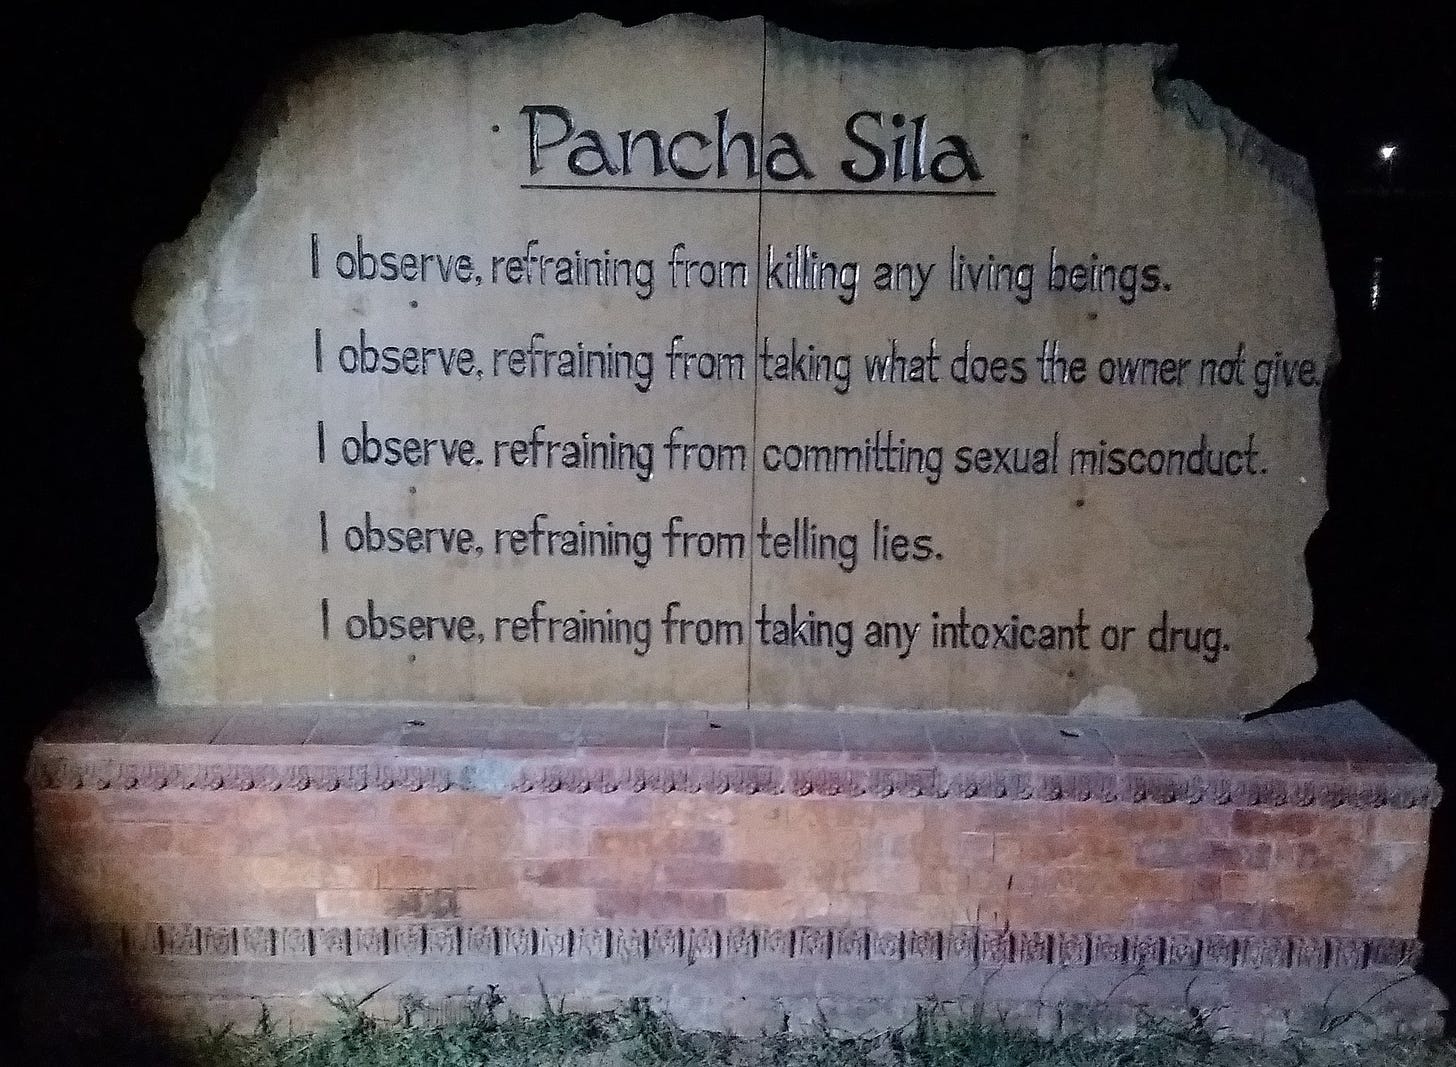 Stone plaque with five precepts shortly described in English, engraved in the stone.